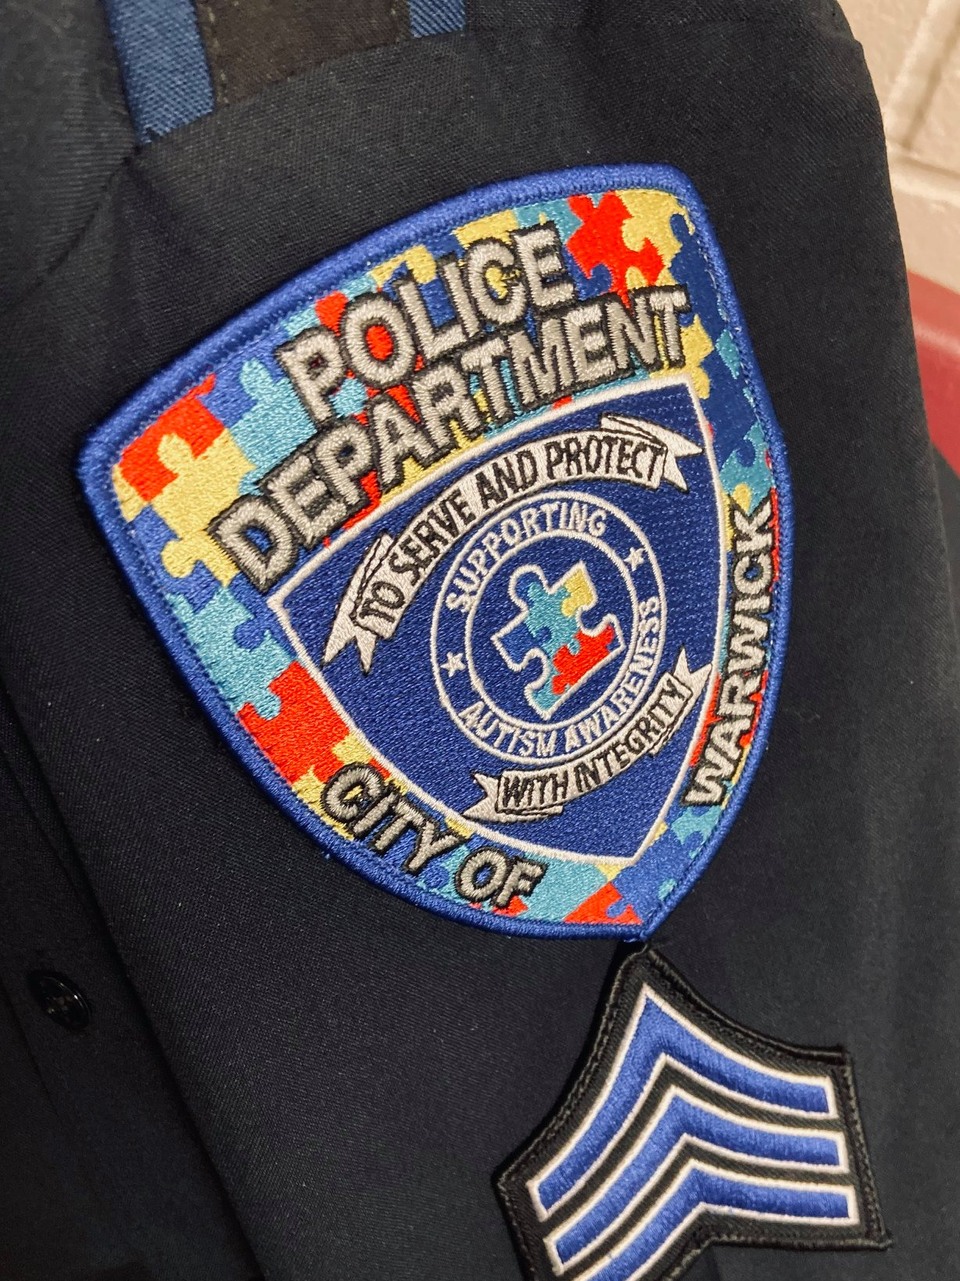 Autism Awarness New York City Police Uniform Patch Version 1 may wear in April